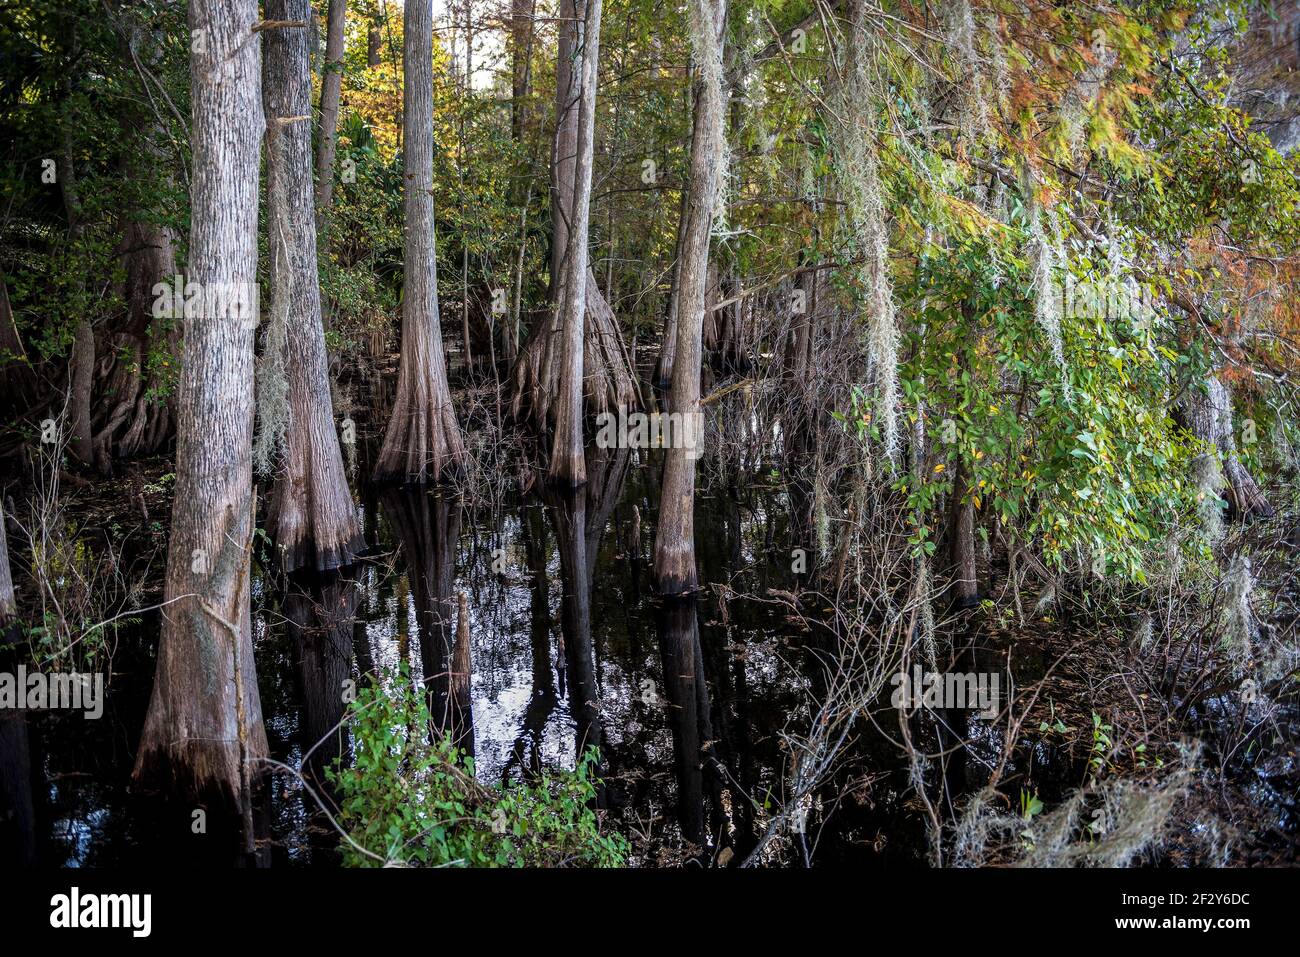 a group of pond cypress tree trunks (Taxodium ascendens) standing in still dark water, Lake Ashby Park, Florida, USA. Stock Photo